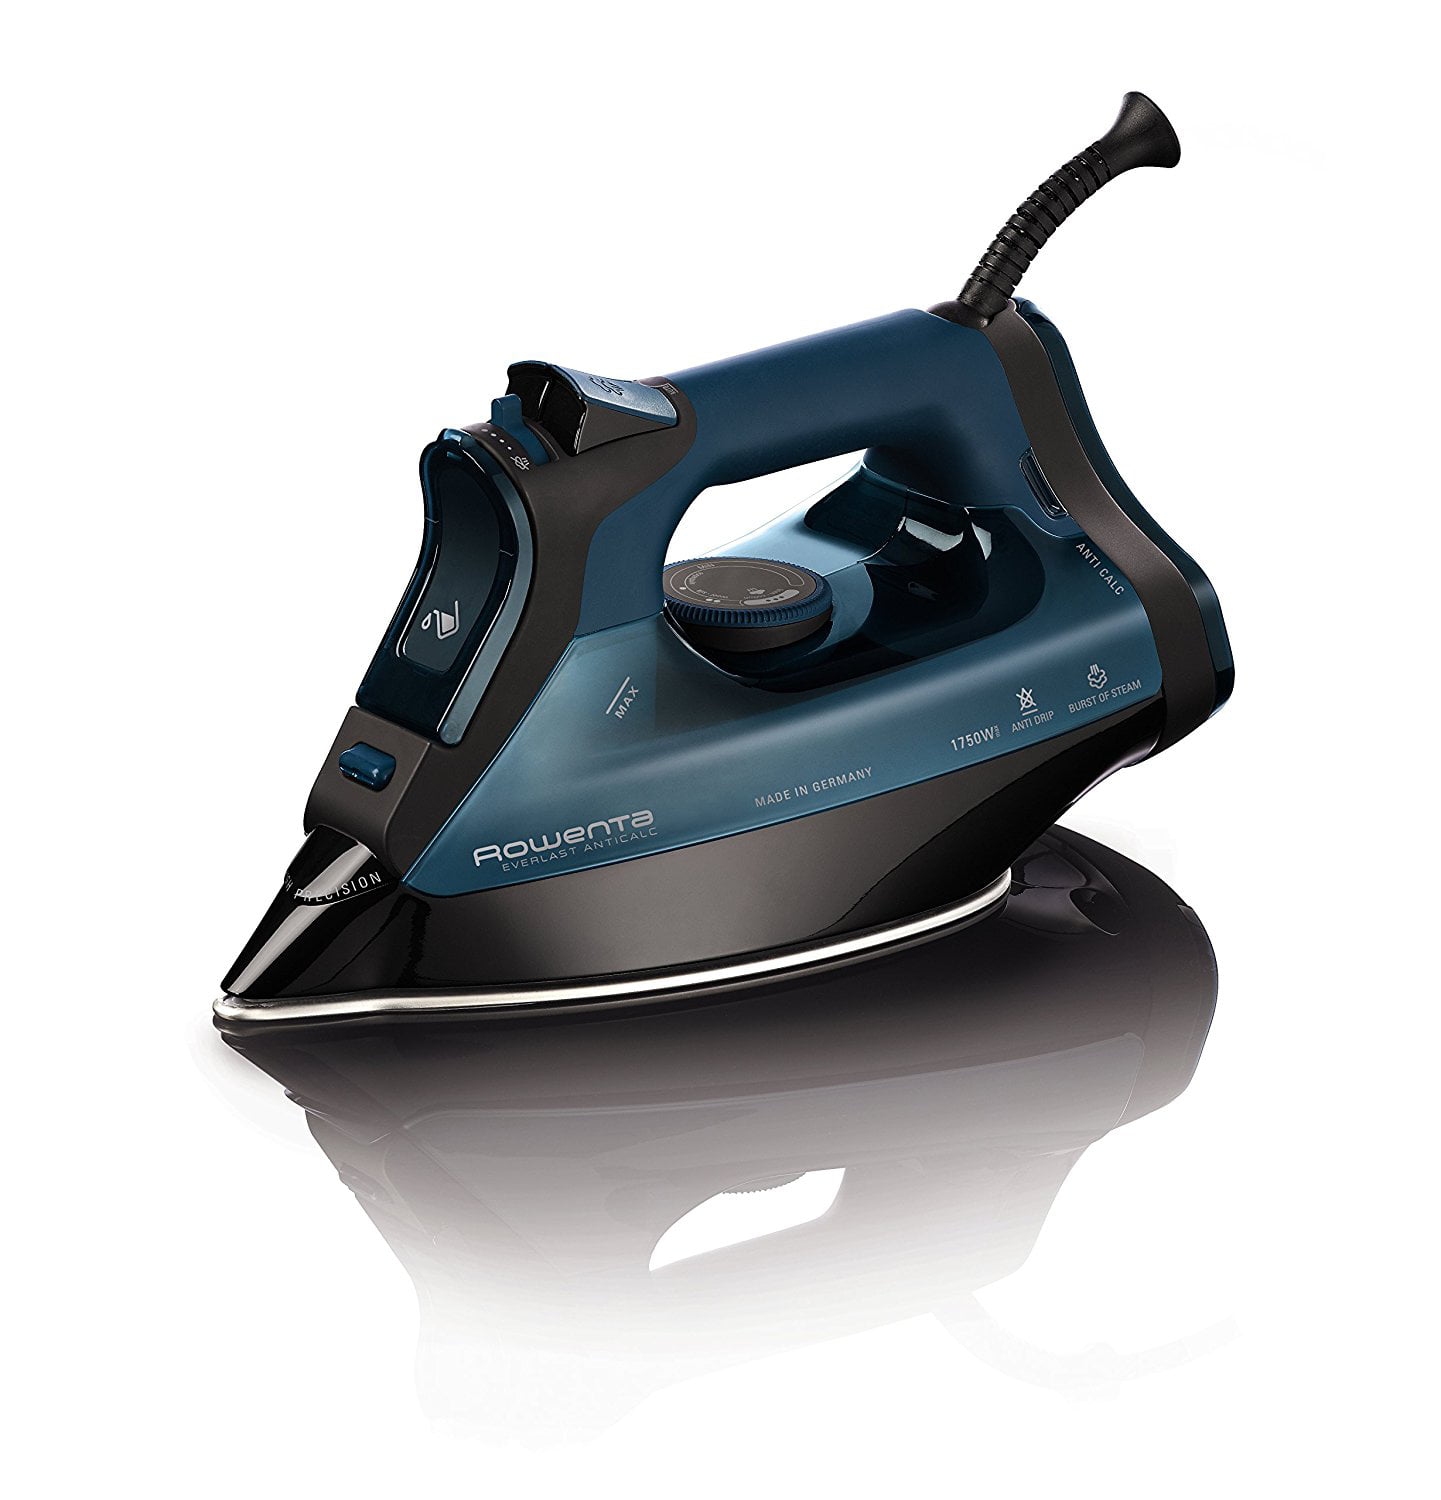 Rowenta Freemove DE5010D1 Iron of Steam without Cable with Swat of Steam 